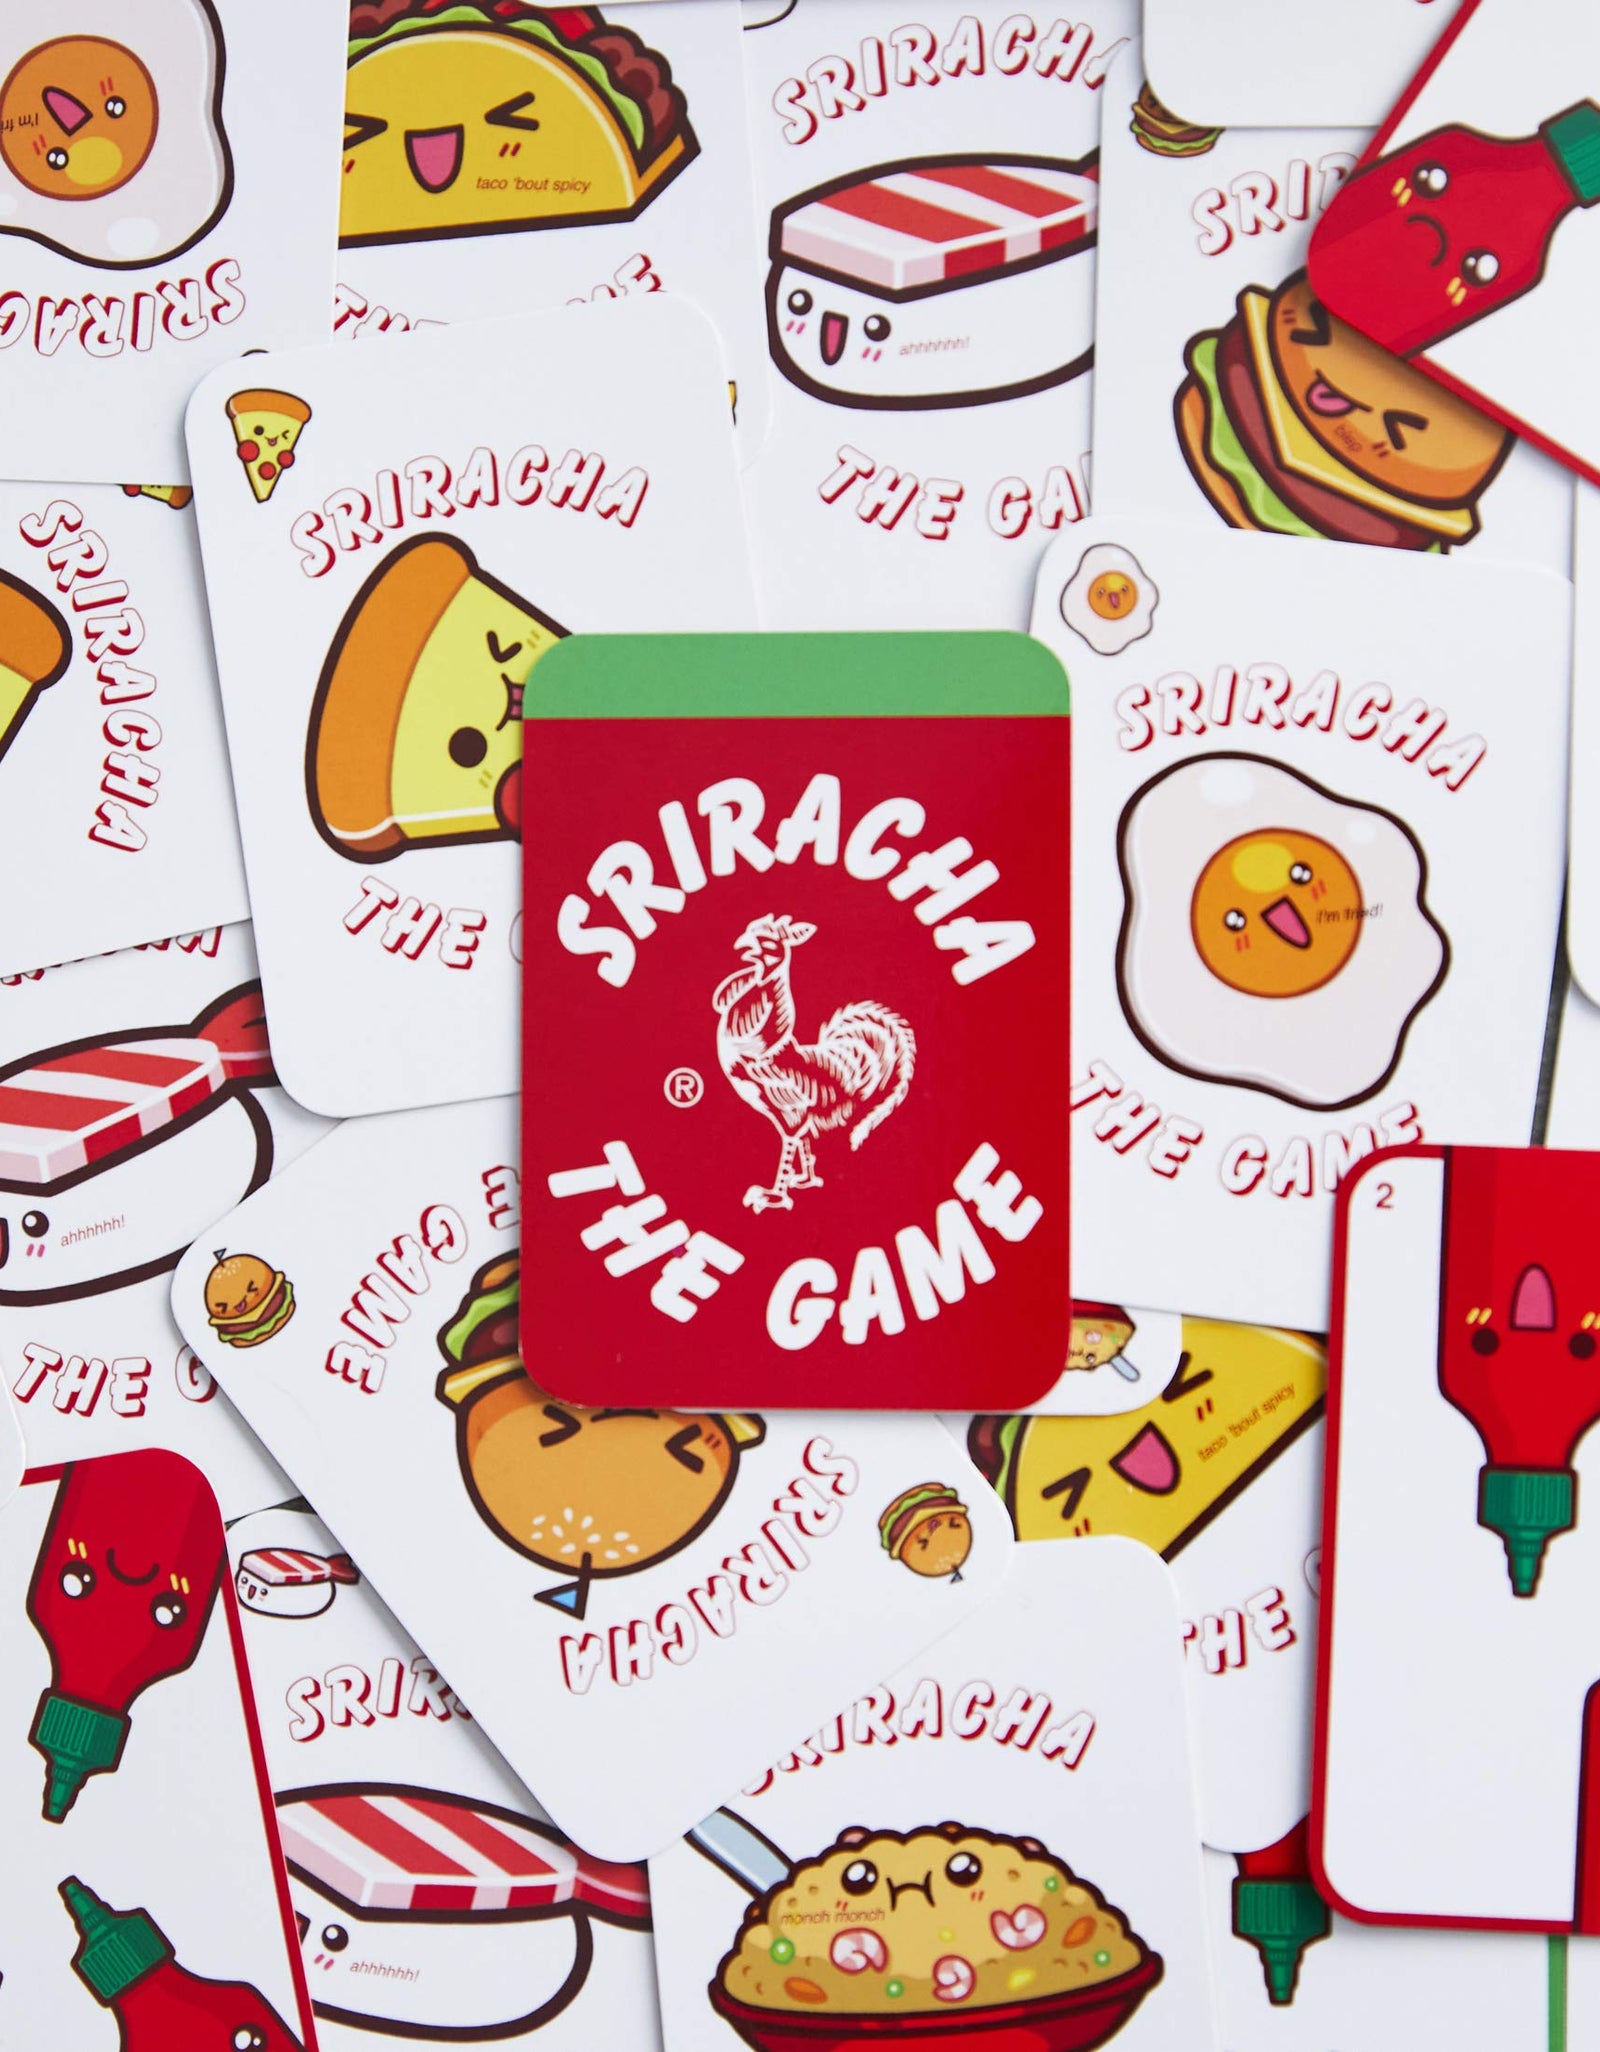 Sriracha: The Game - A Spicy Slapping Card Game for The Whole Family